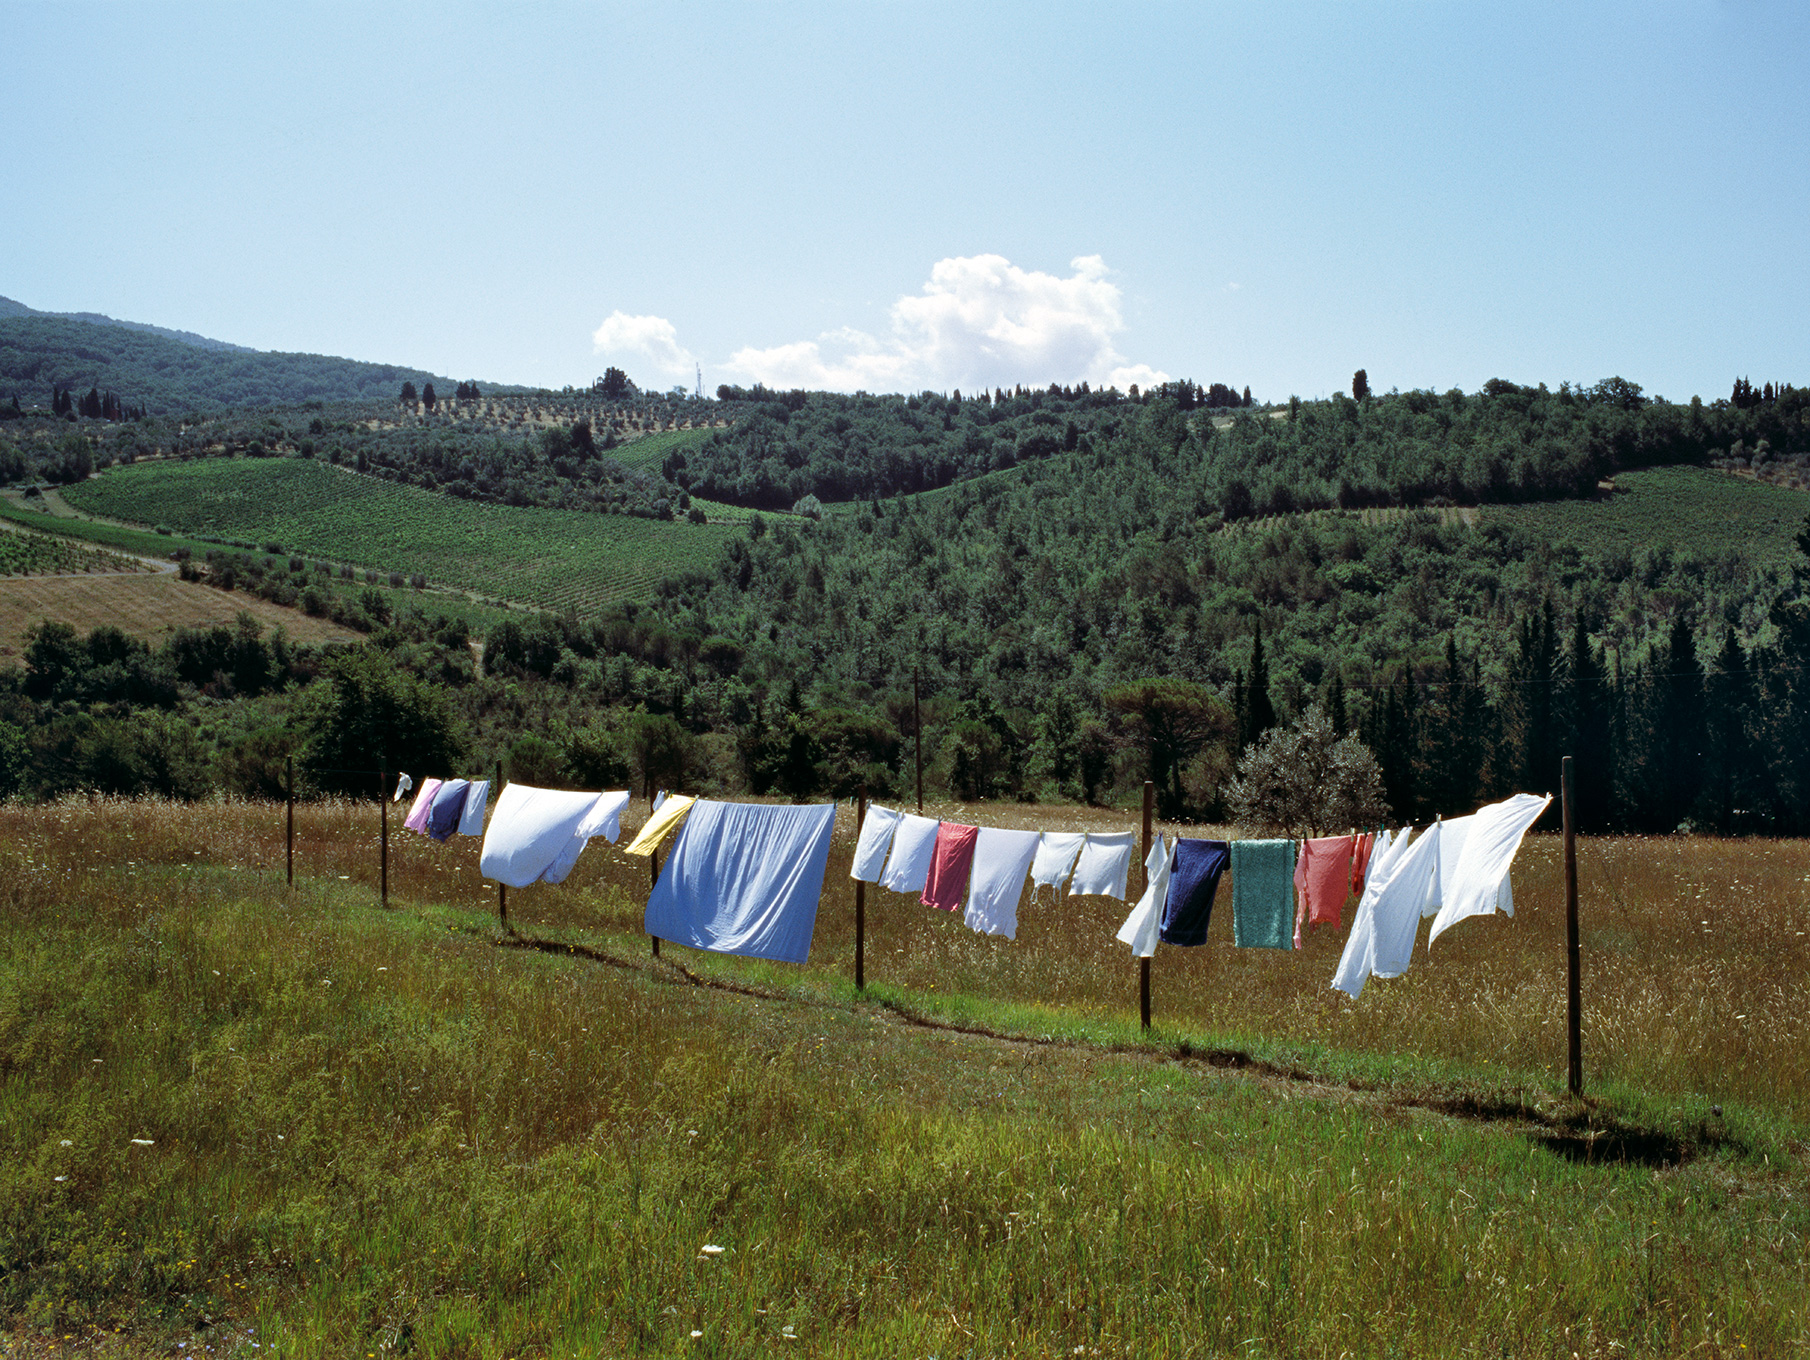   Just washed,  Montalcino, Italy, 2013  